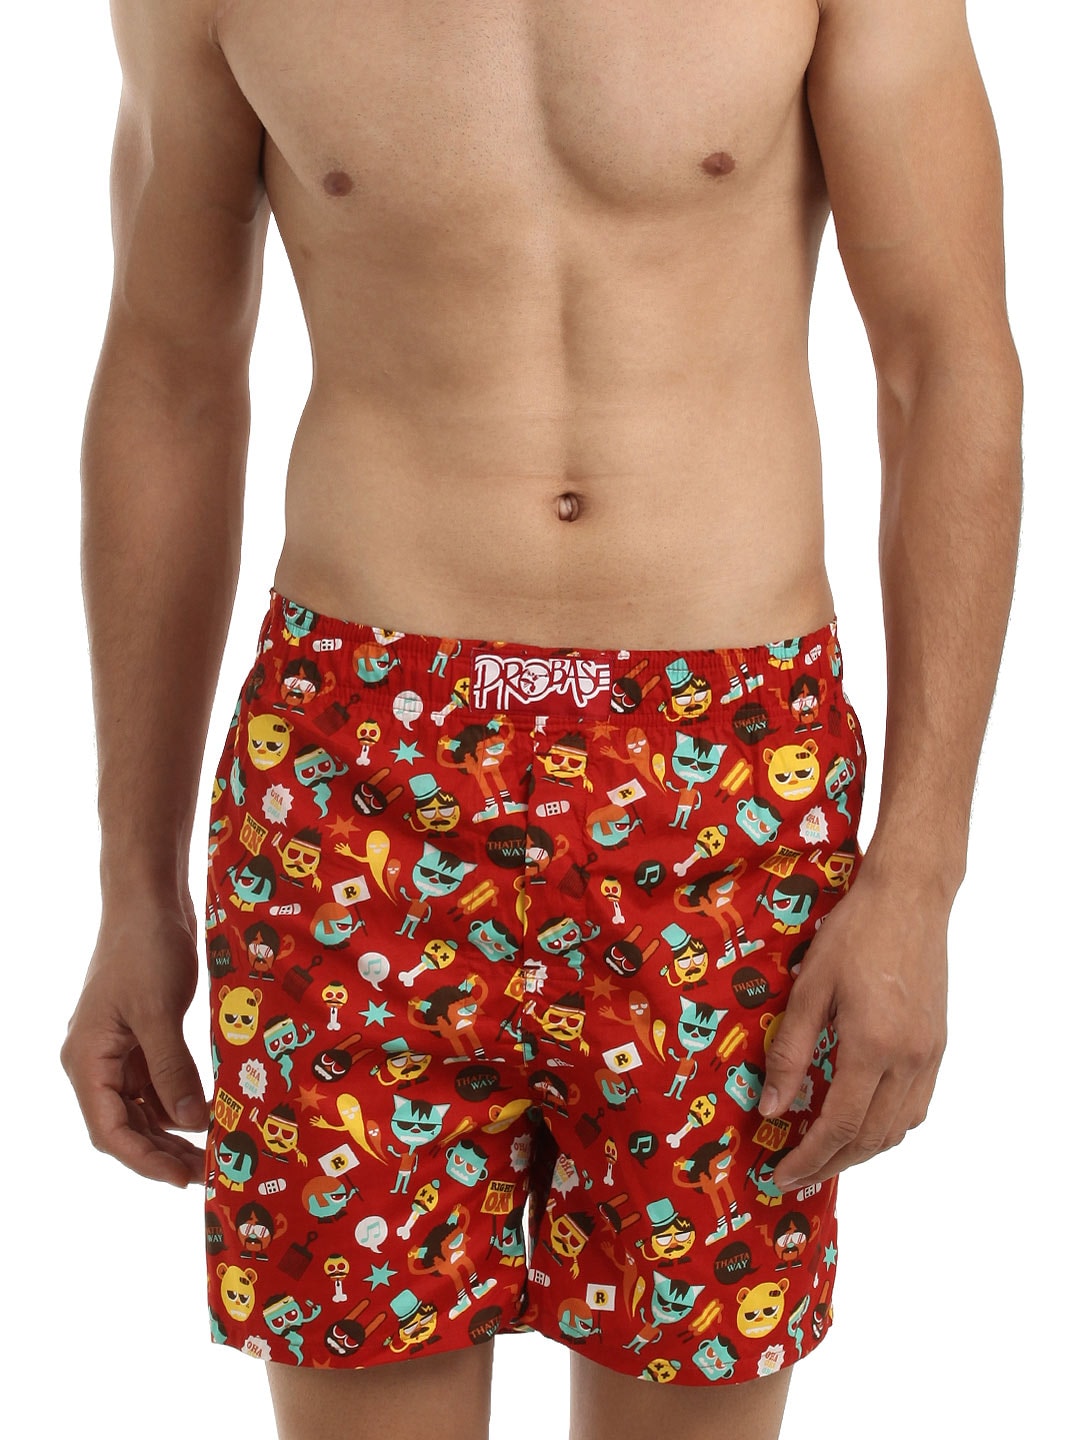 Probase Red Printed Boxers